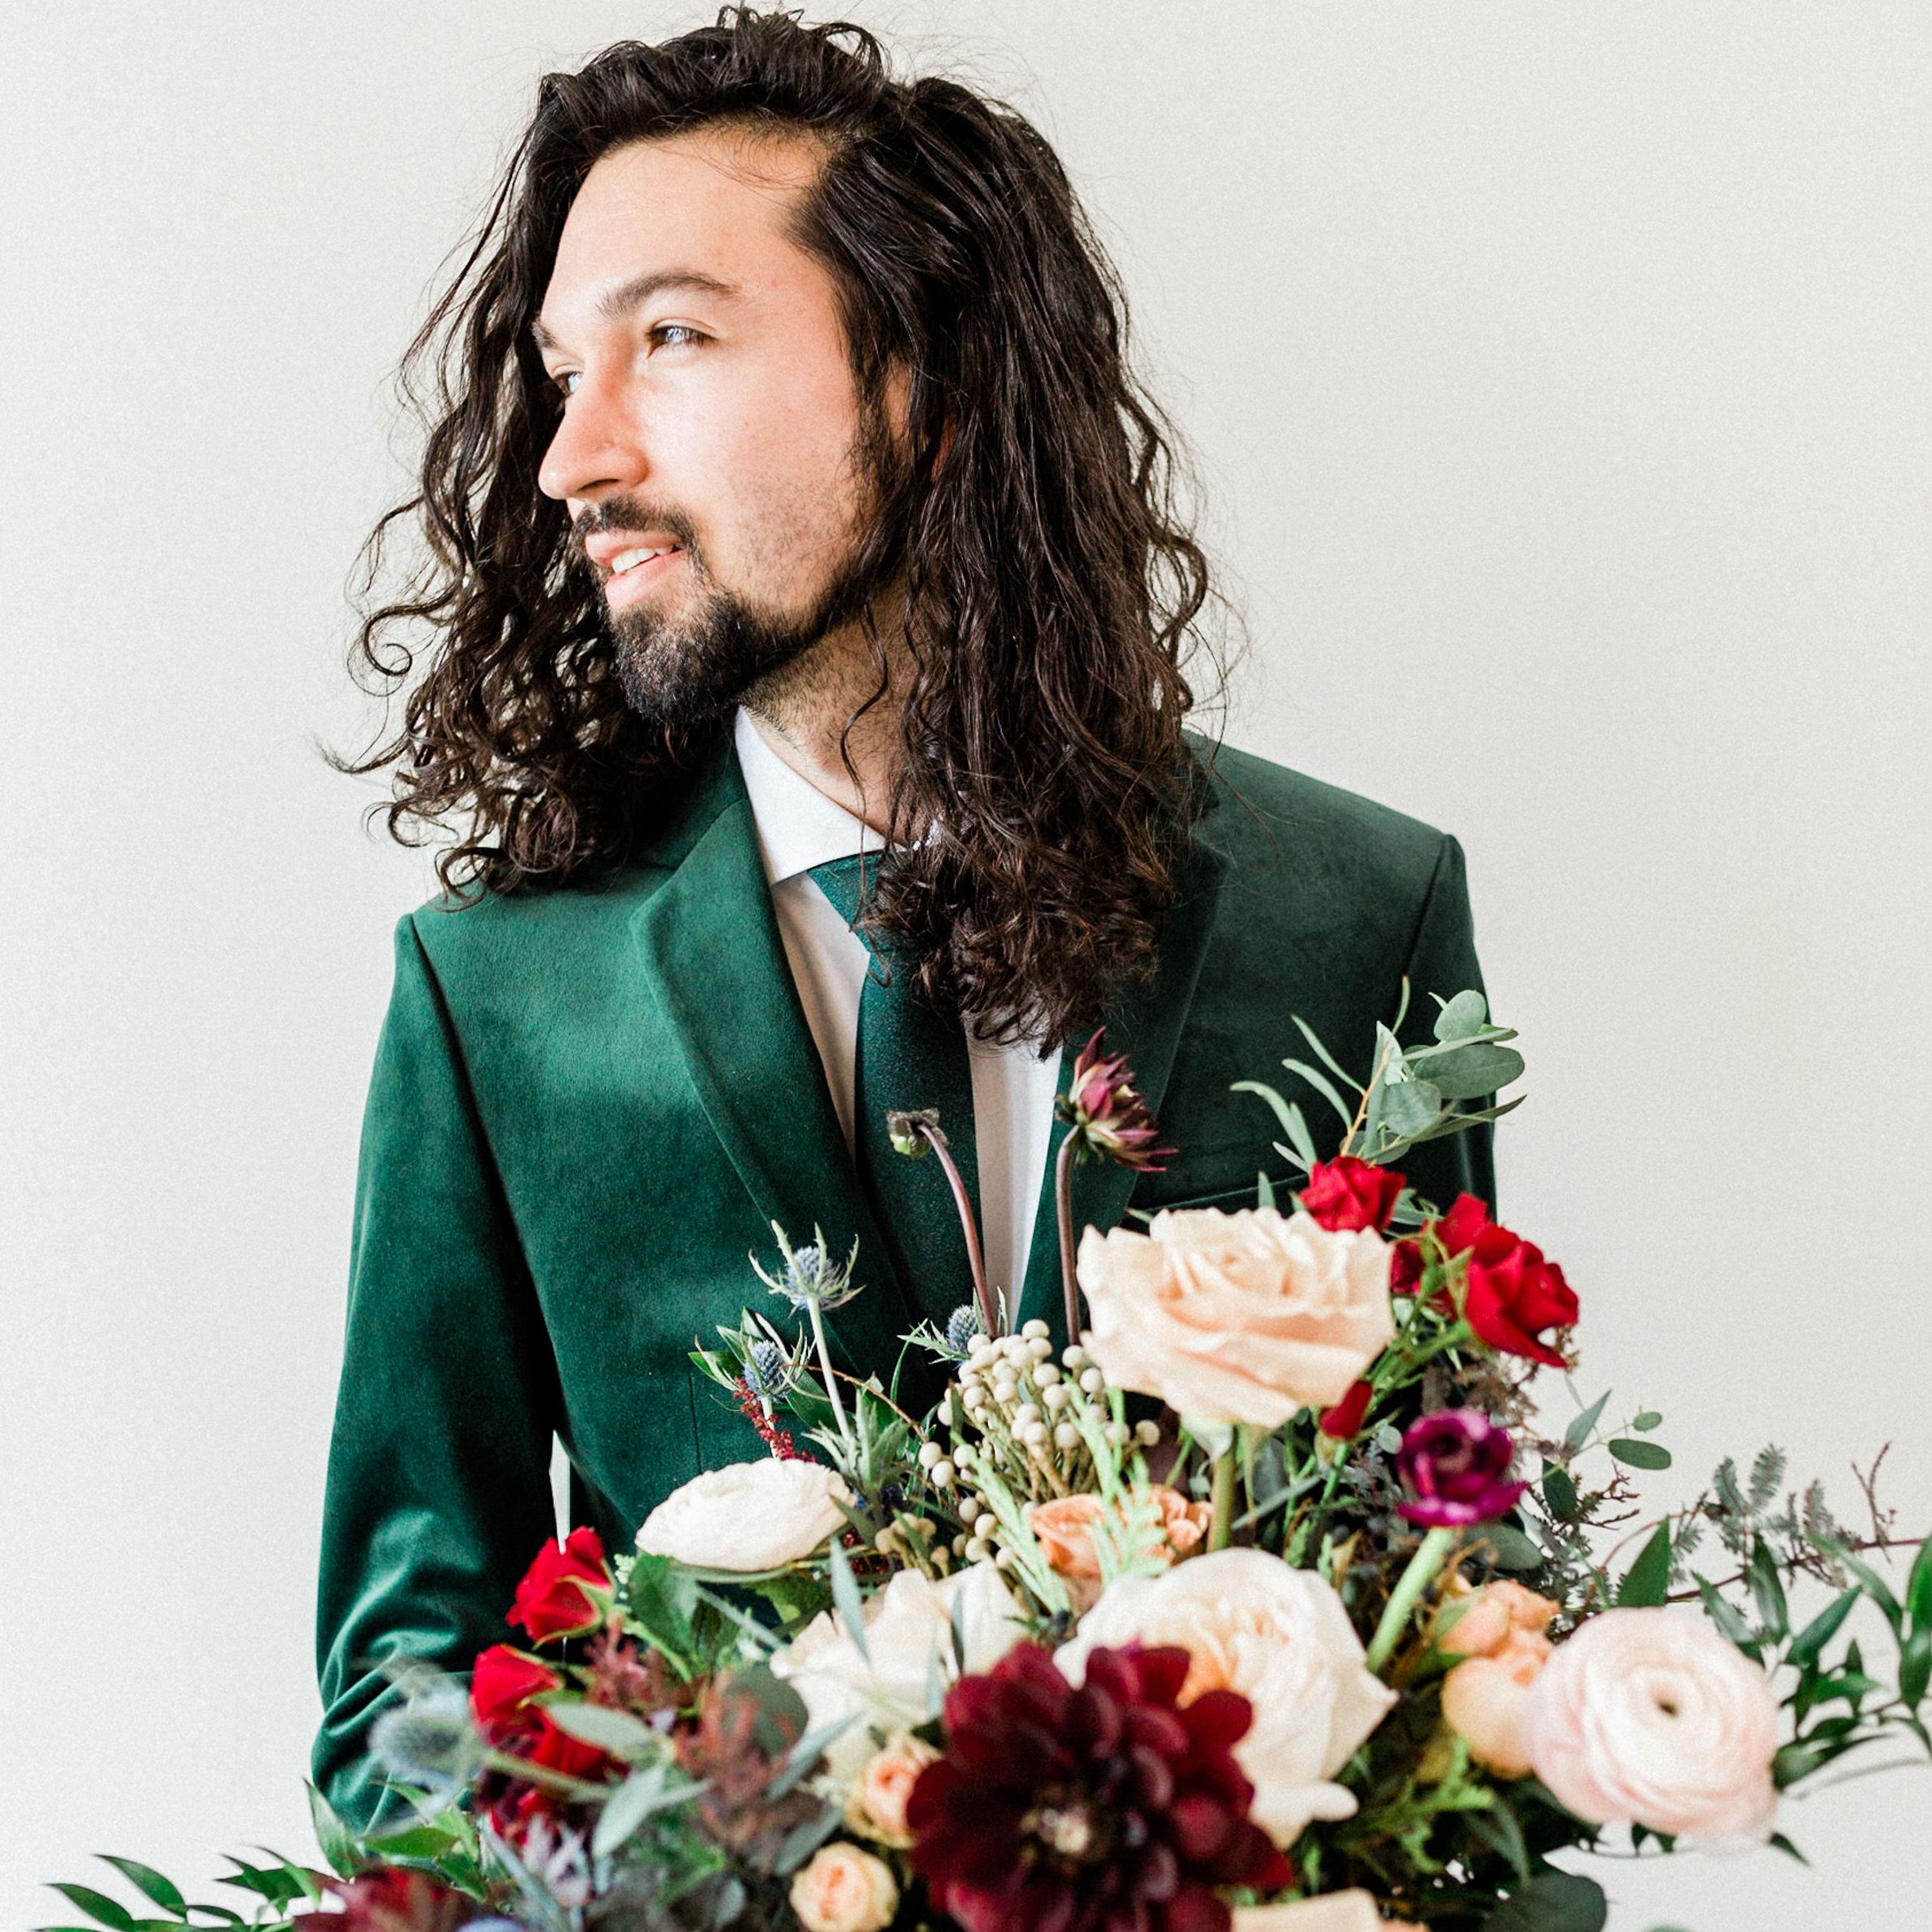 Image of Matthew Ramirez standing behind a bouquet of beautiful flowers wearing a green suit and tie. A white man with long dark brown hair with a beard and moustache looks off to the left into the distance.